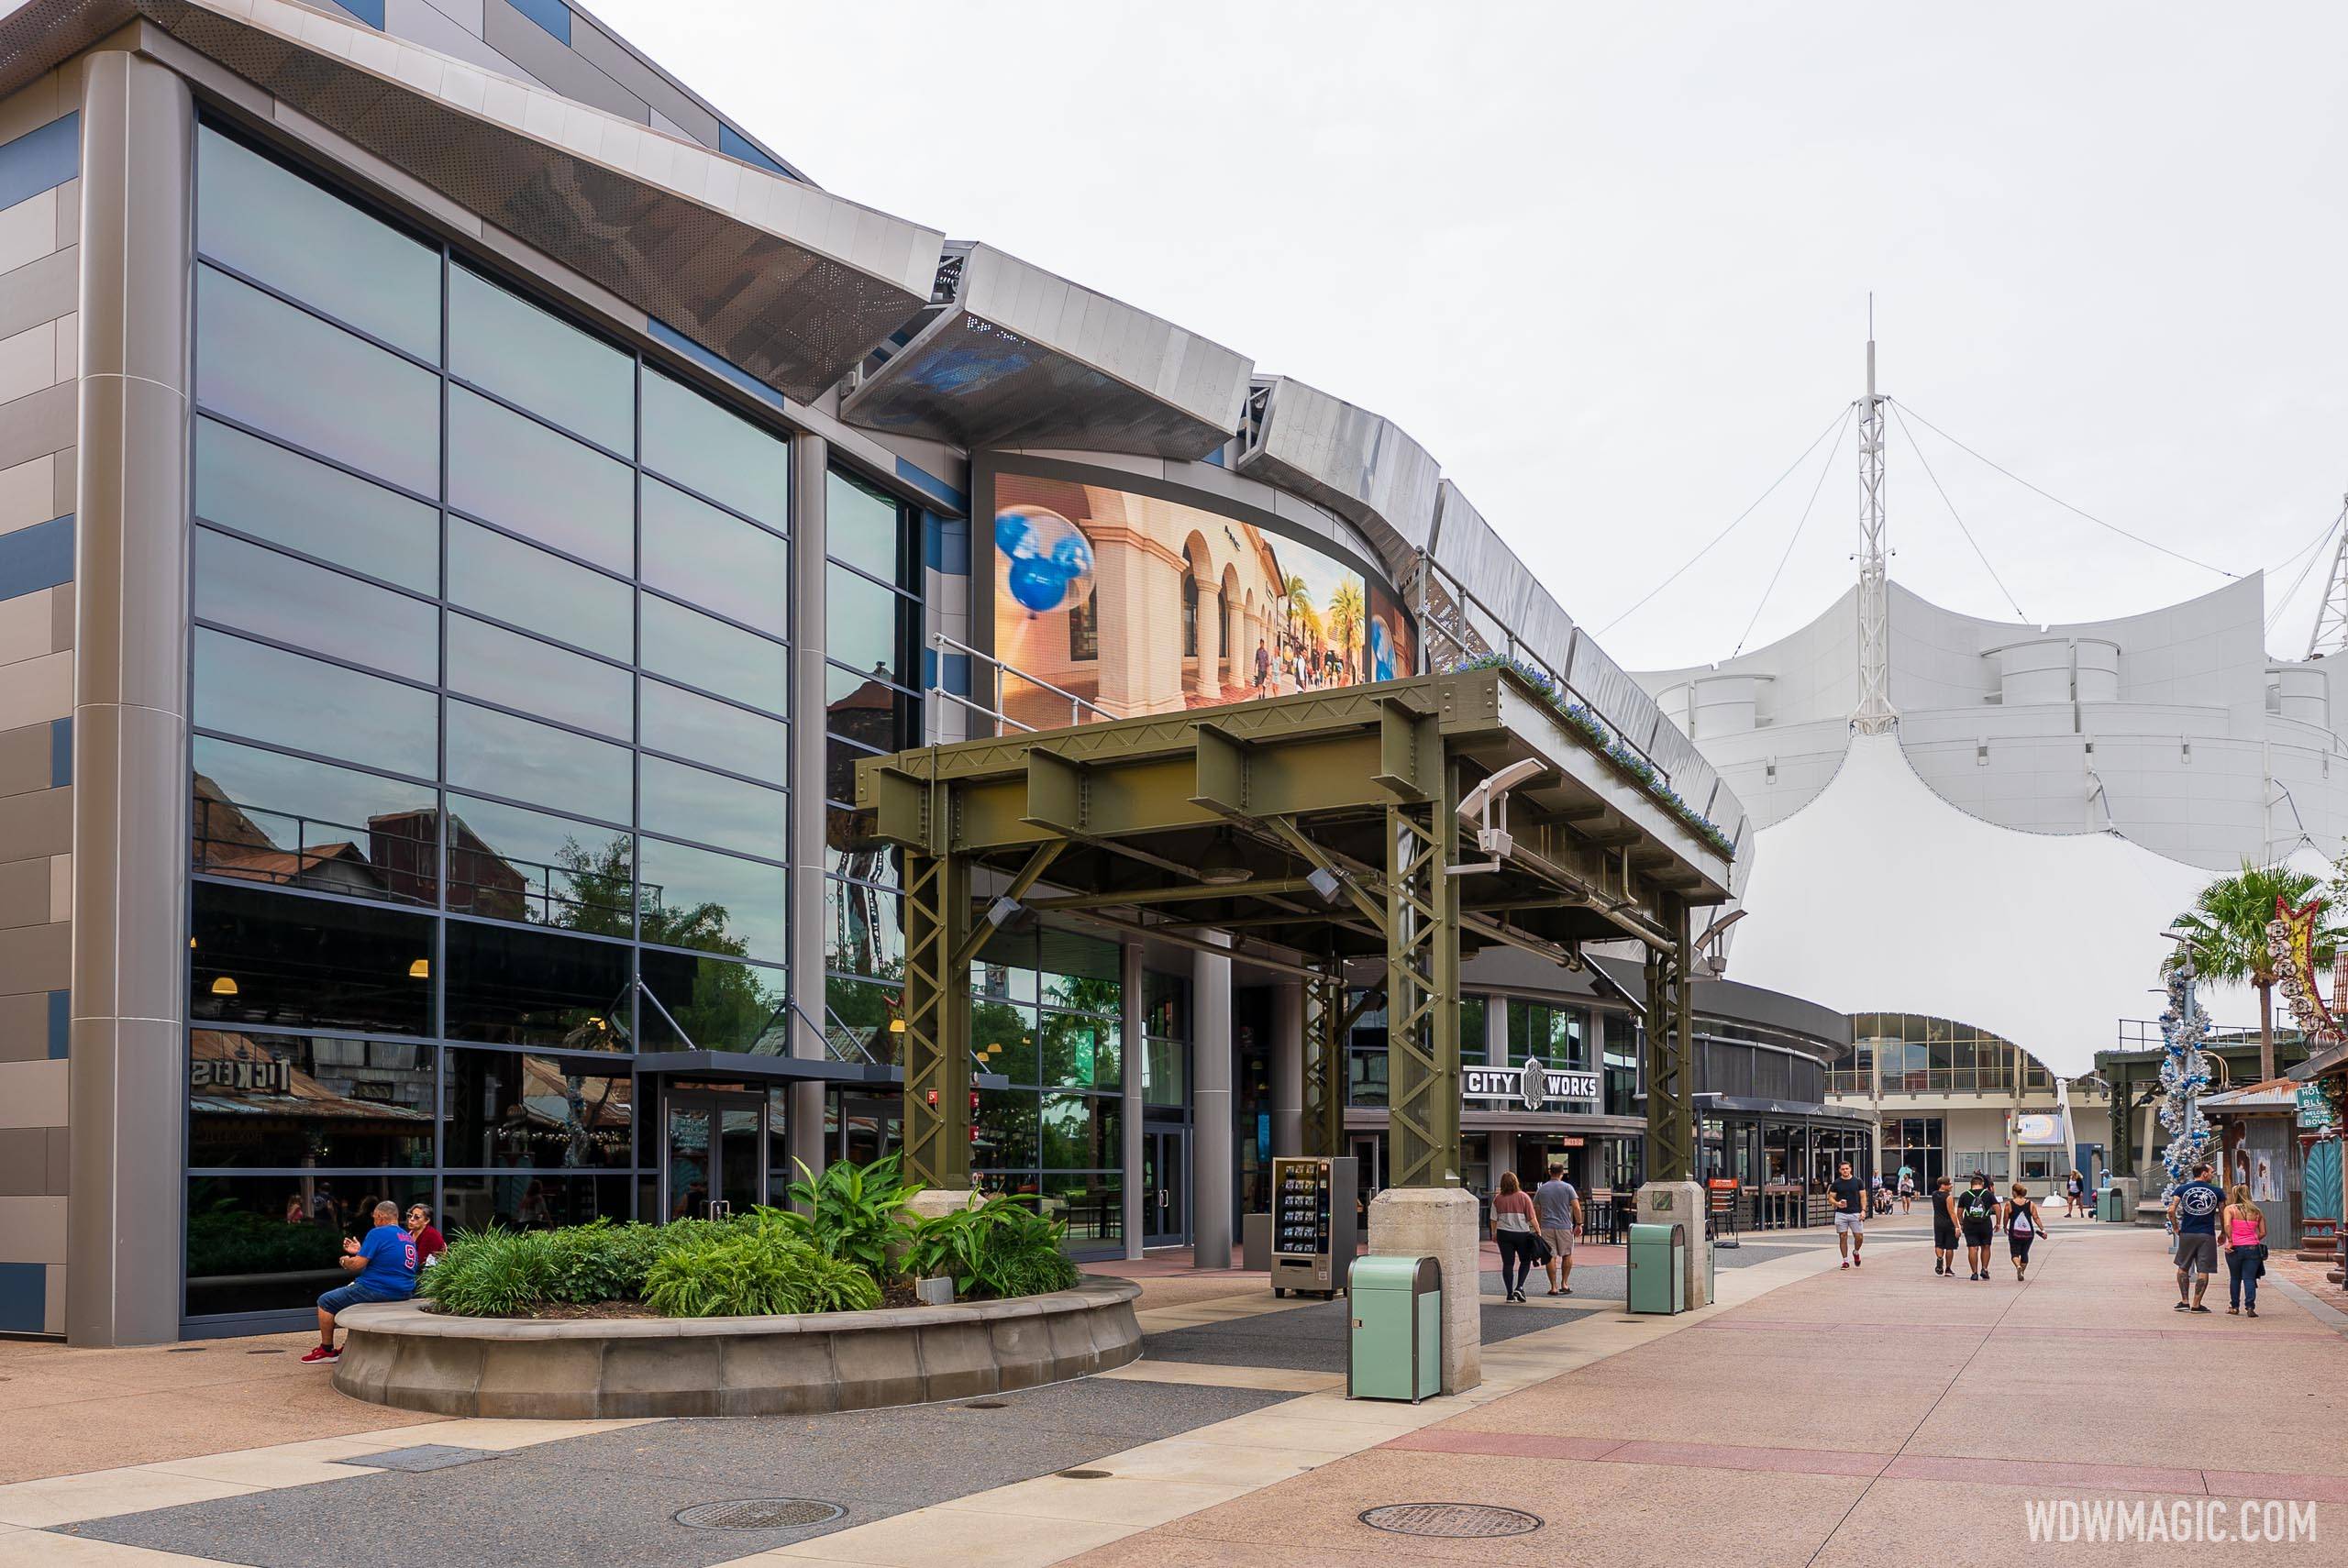 Permit filed for demolition at the former NBA Experience in Disney Springs